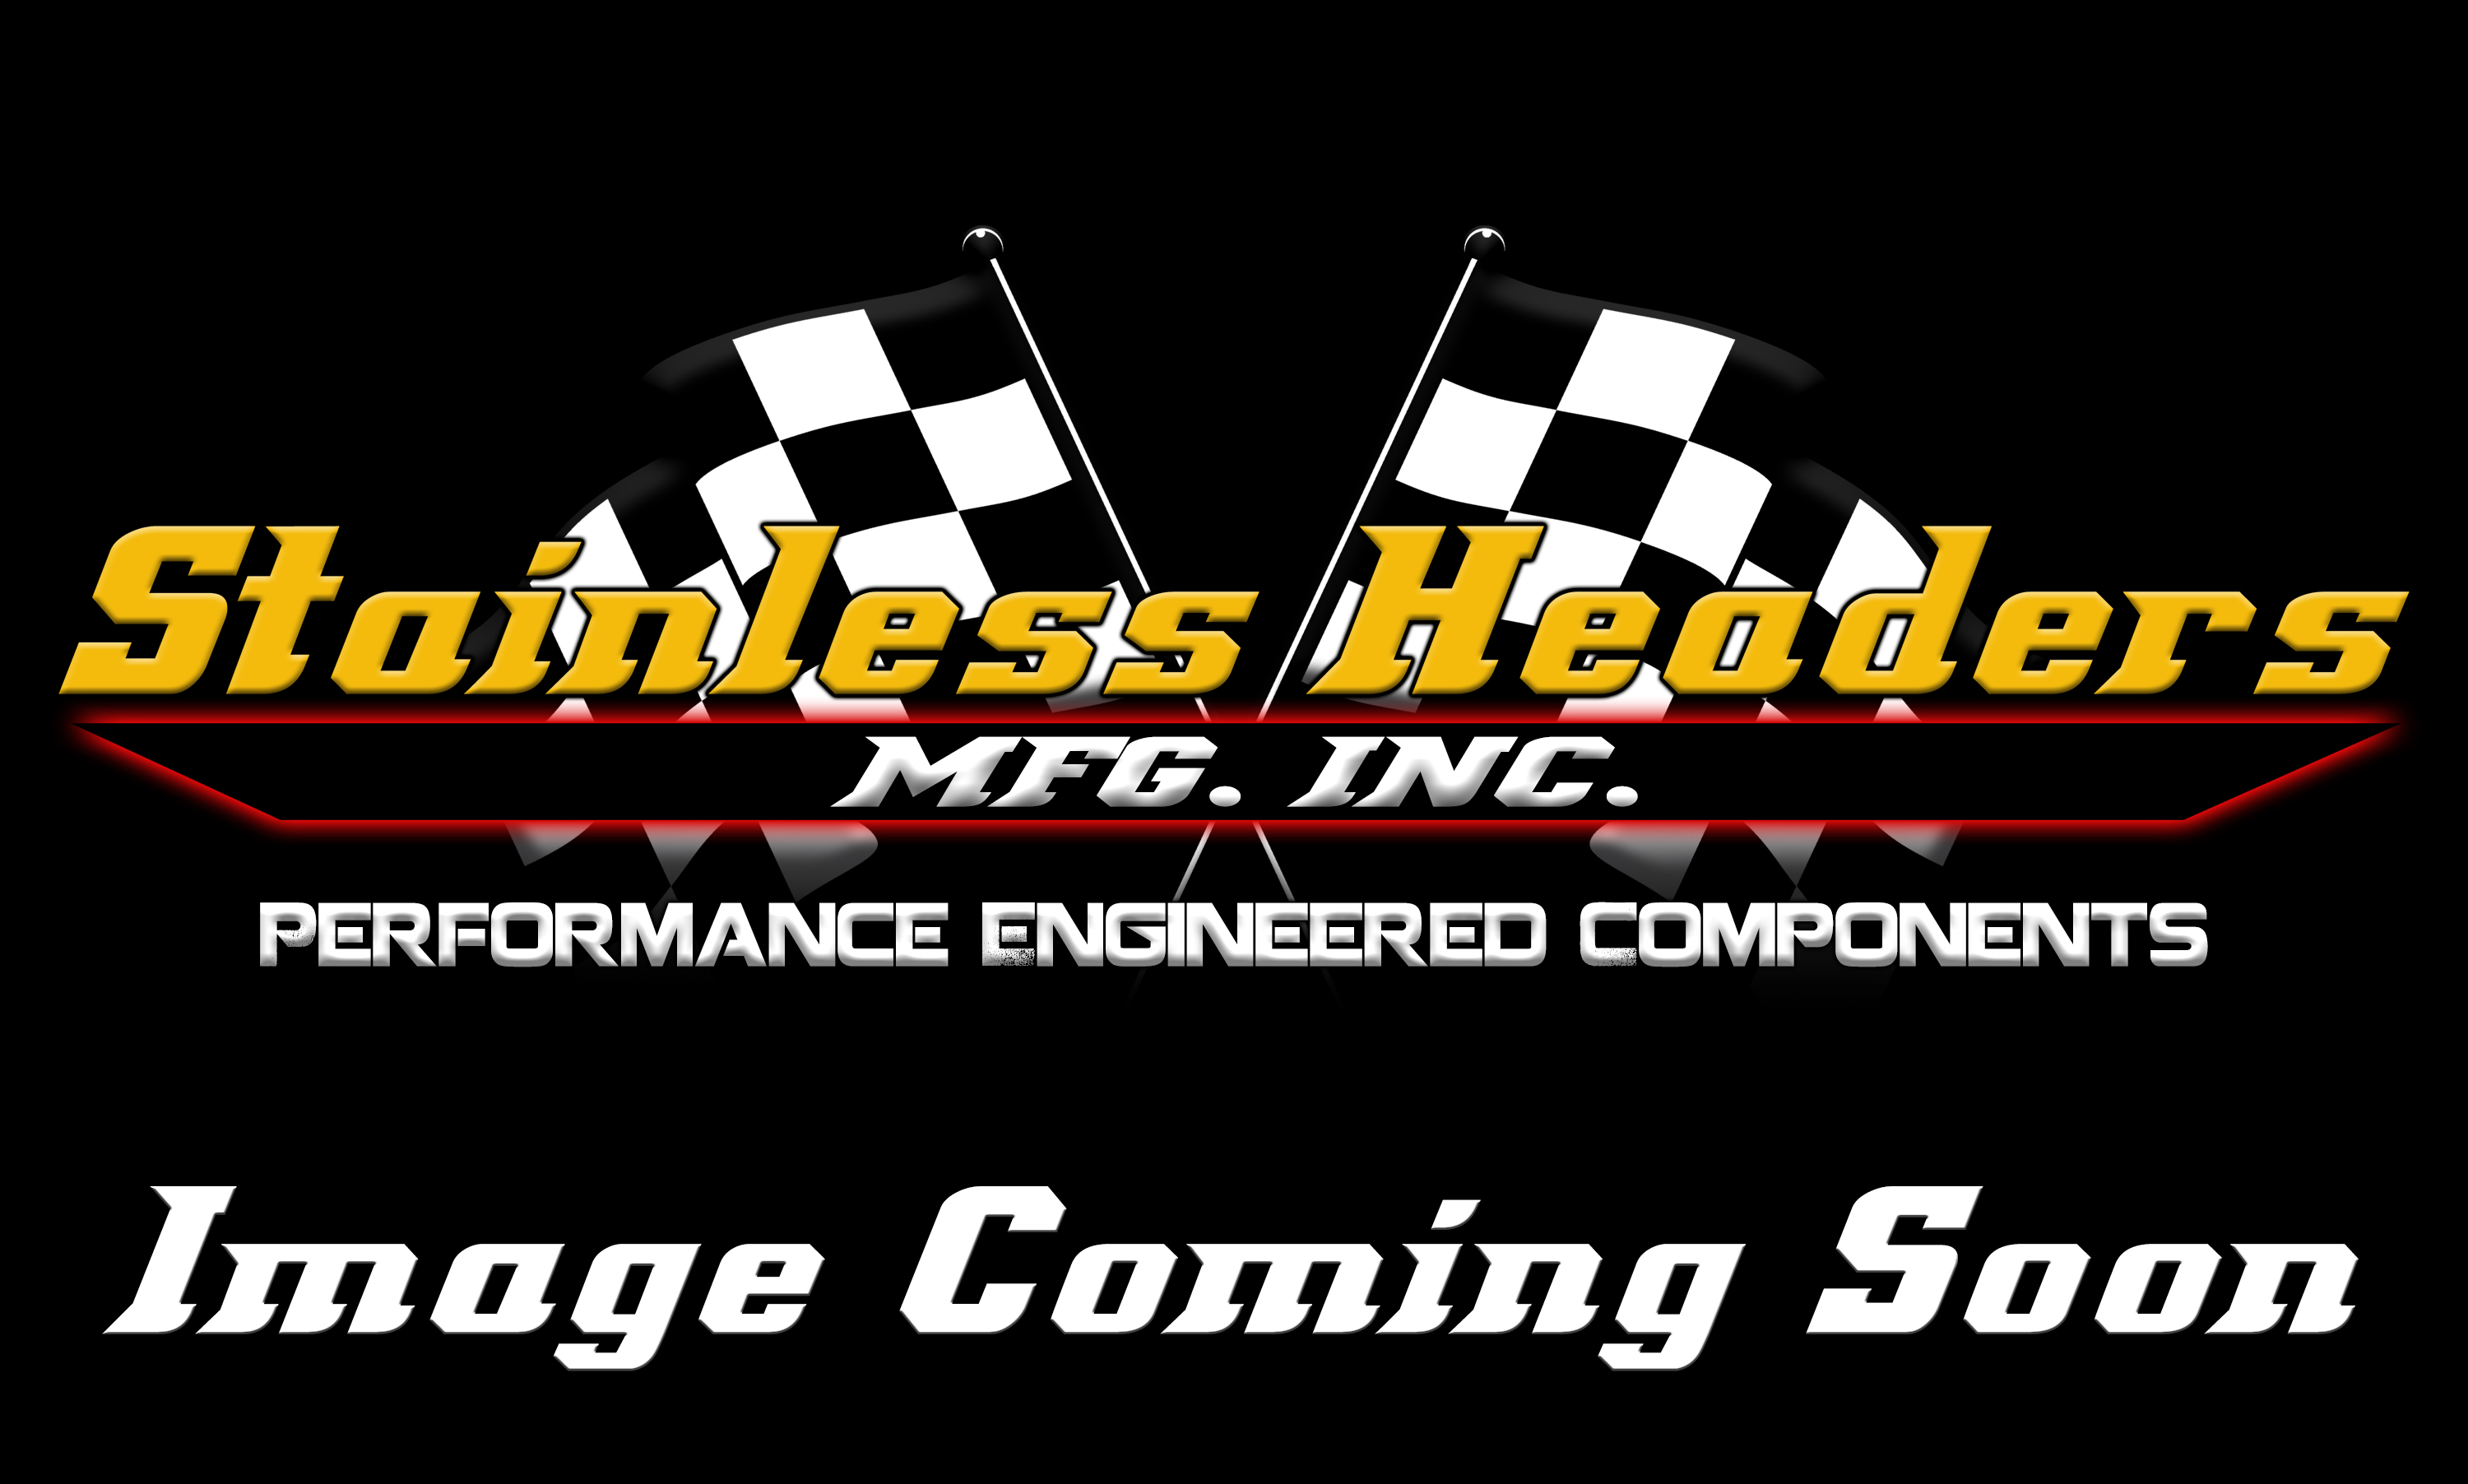 Custom Header Components - Merge Collectors - Stainless Headers - 1 5/8" Primary 2 into 1 Performance Merge Collector-16ga 321ss